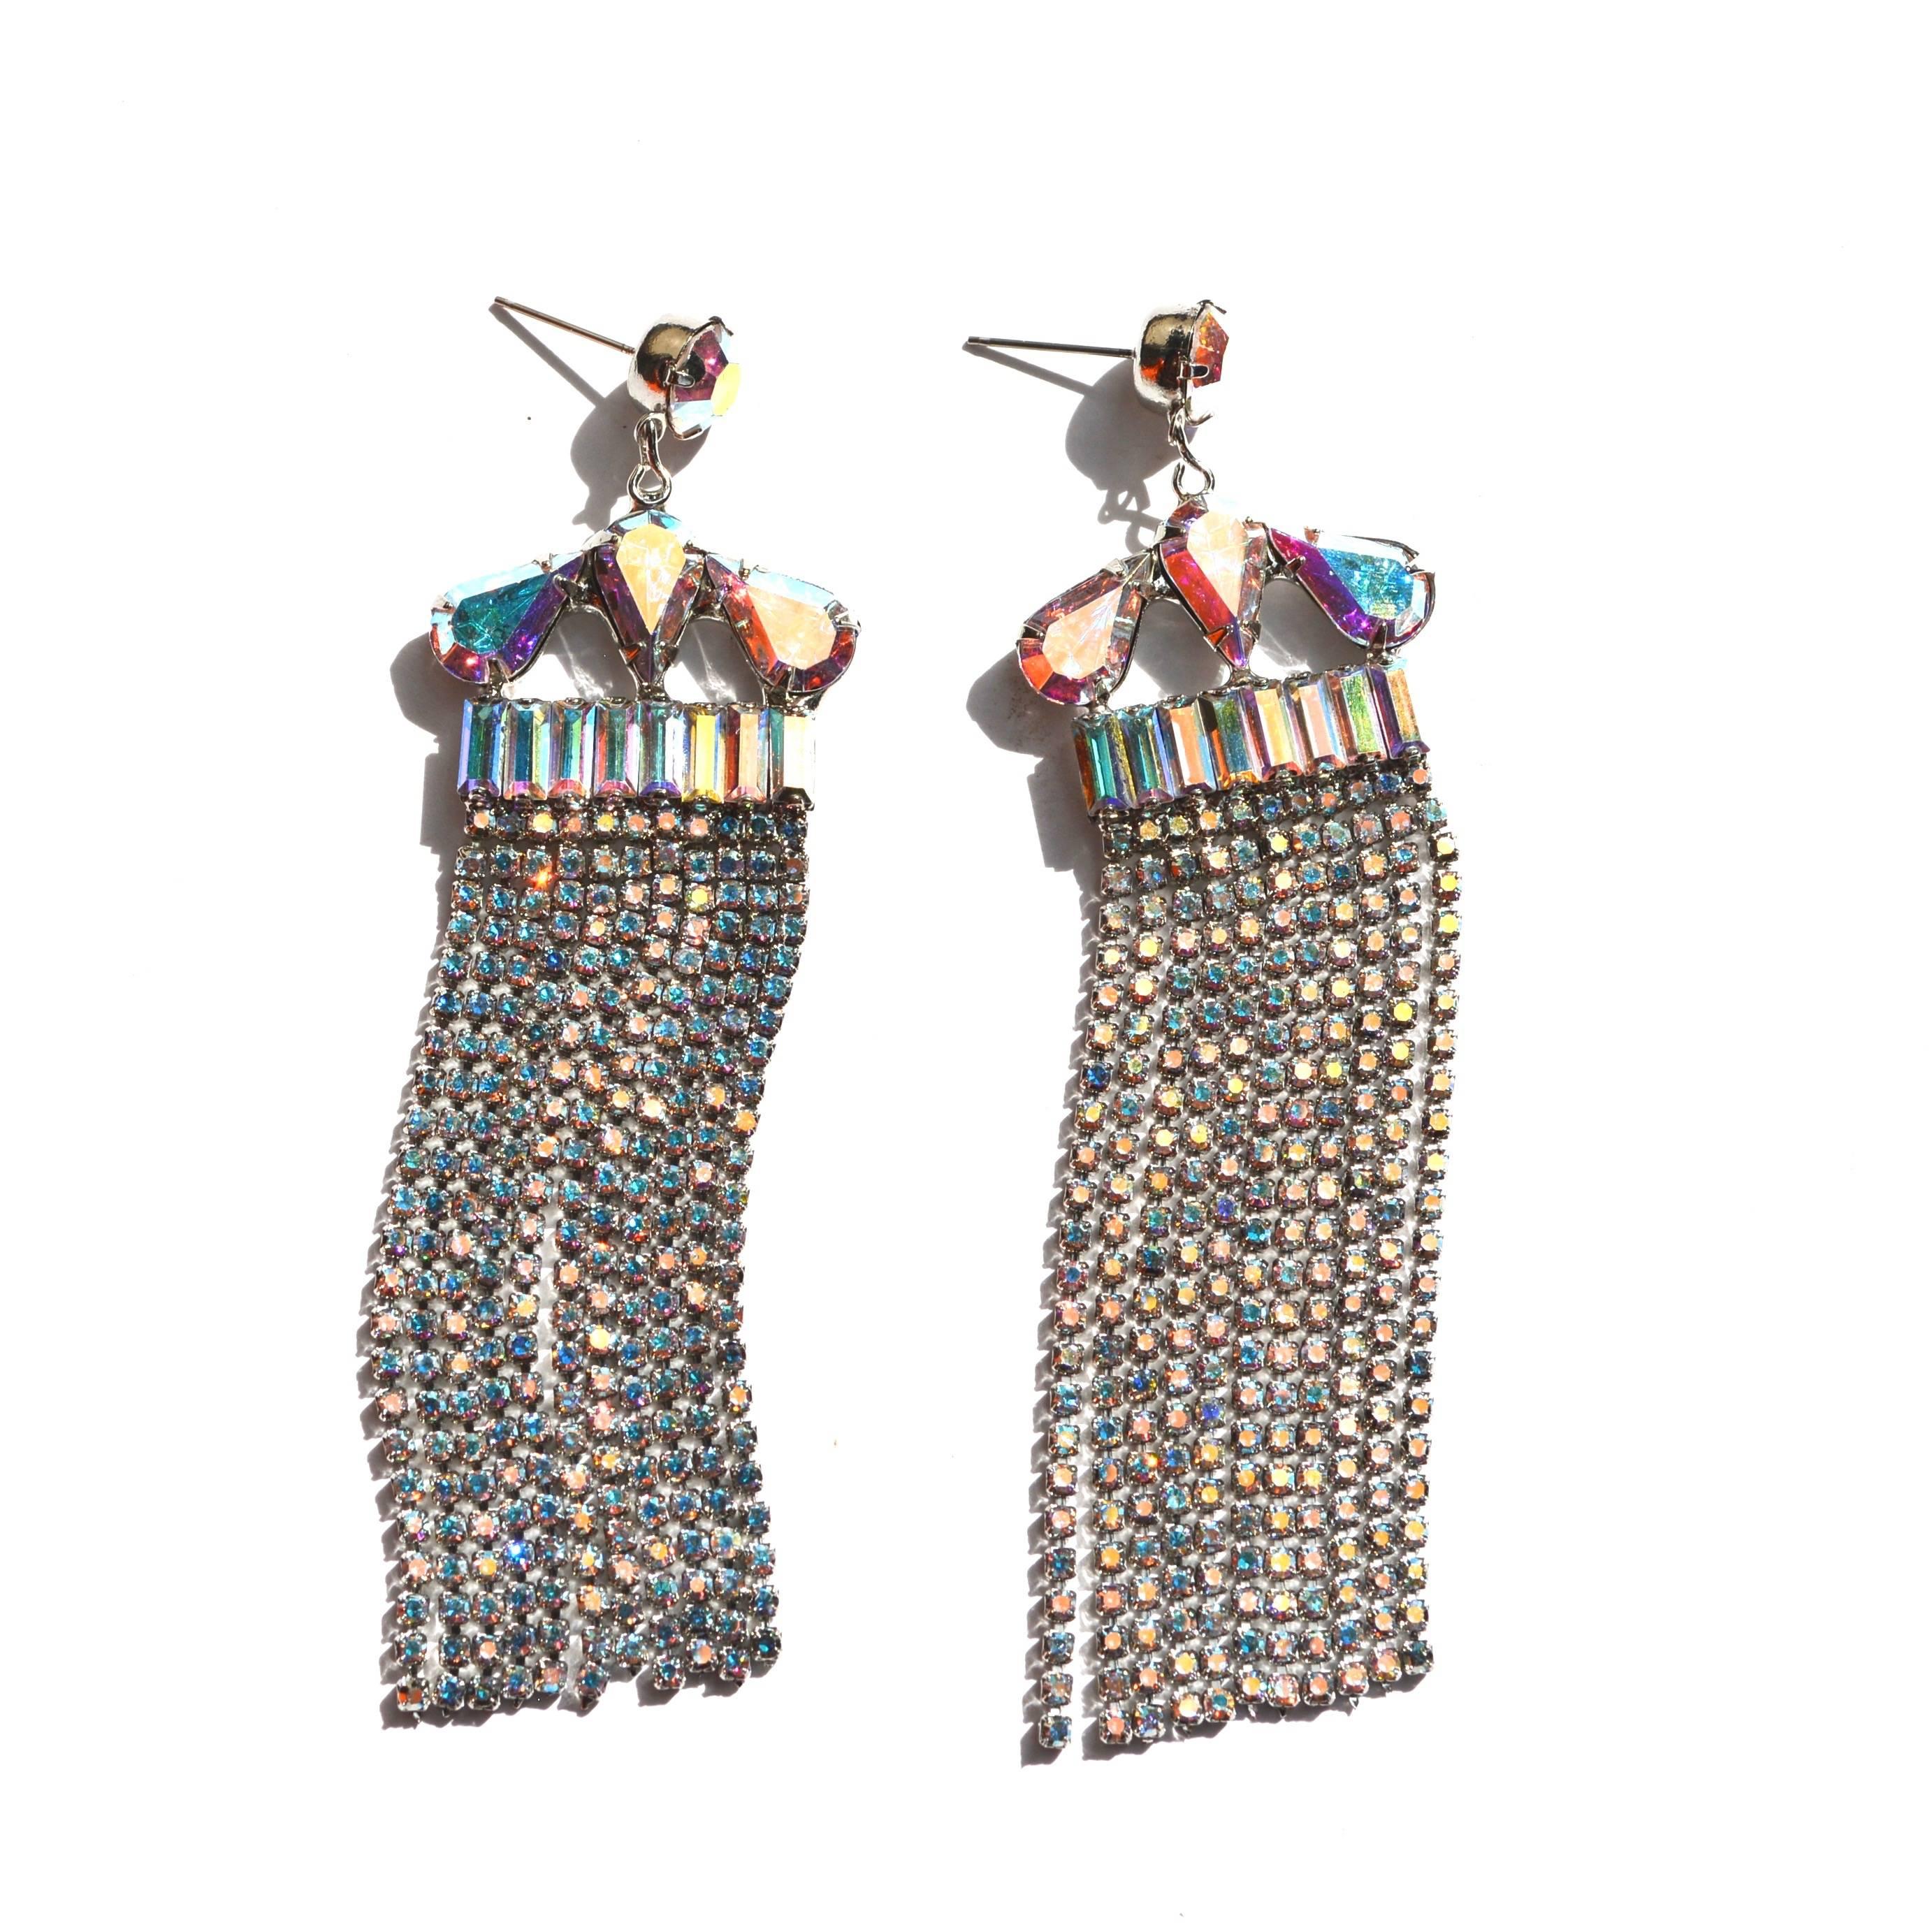 Rhinestone Swarovski rocker fringe earrings. Rhodium plated. From our new earring collection. Made in the USA by hand. We use Swarovski crystal.  4″ length. Part of a new line of jewelry based on our studies of theater, showgirl, and modern design.